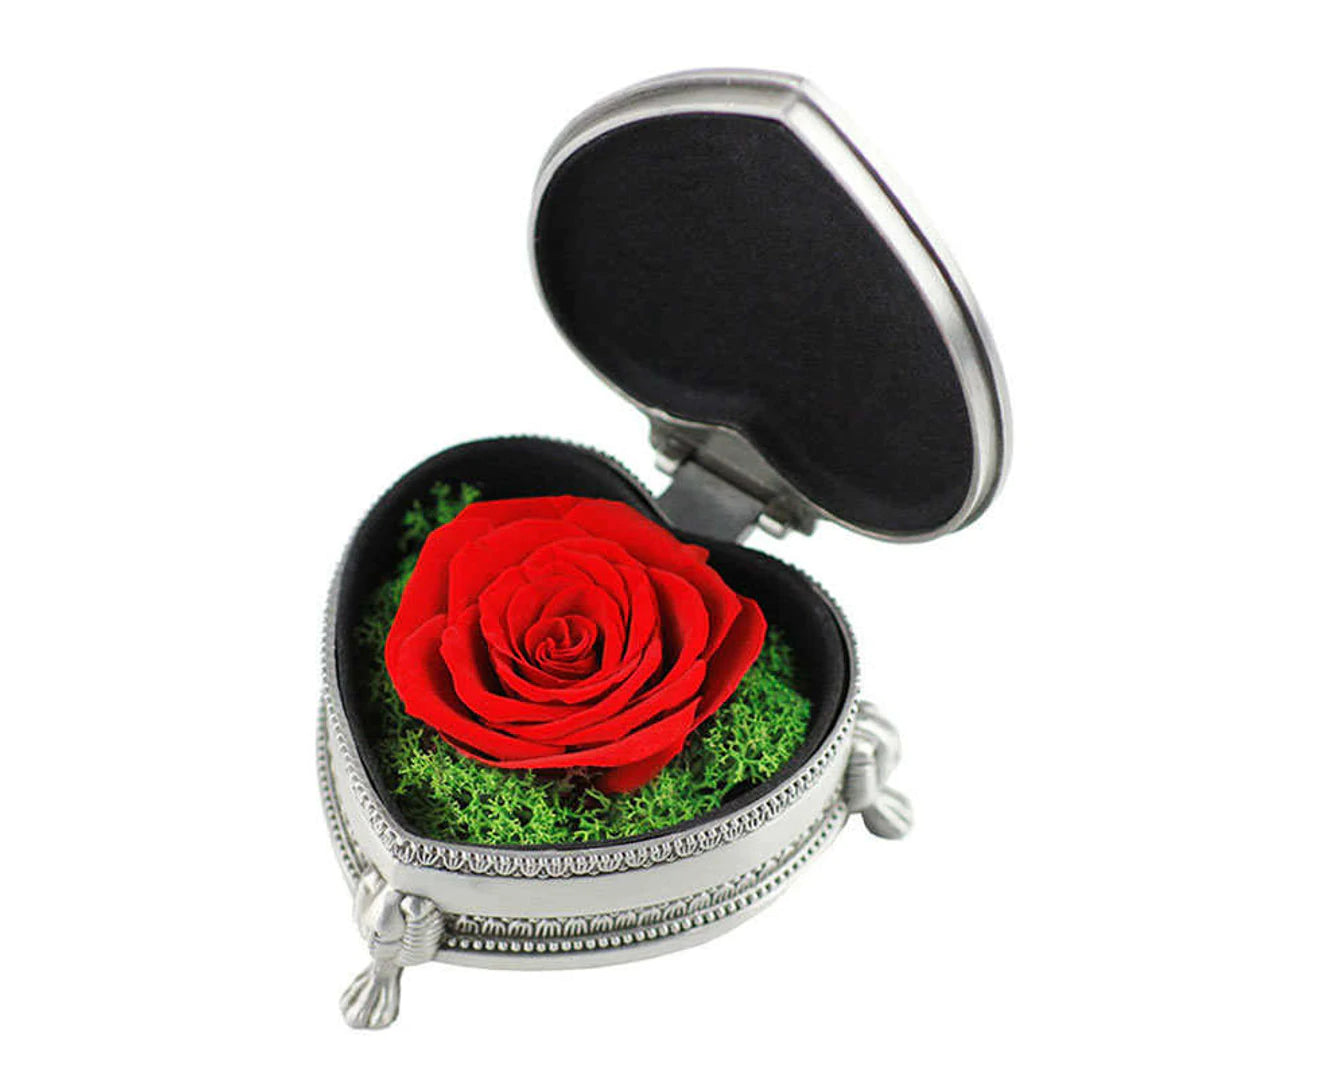 Bestier Preserved Flower Rose Heart Gift Box Valentines Day Gift for Her Wife-Silver/Red